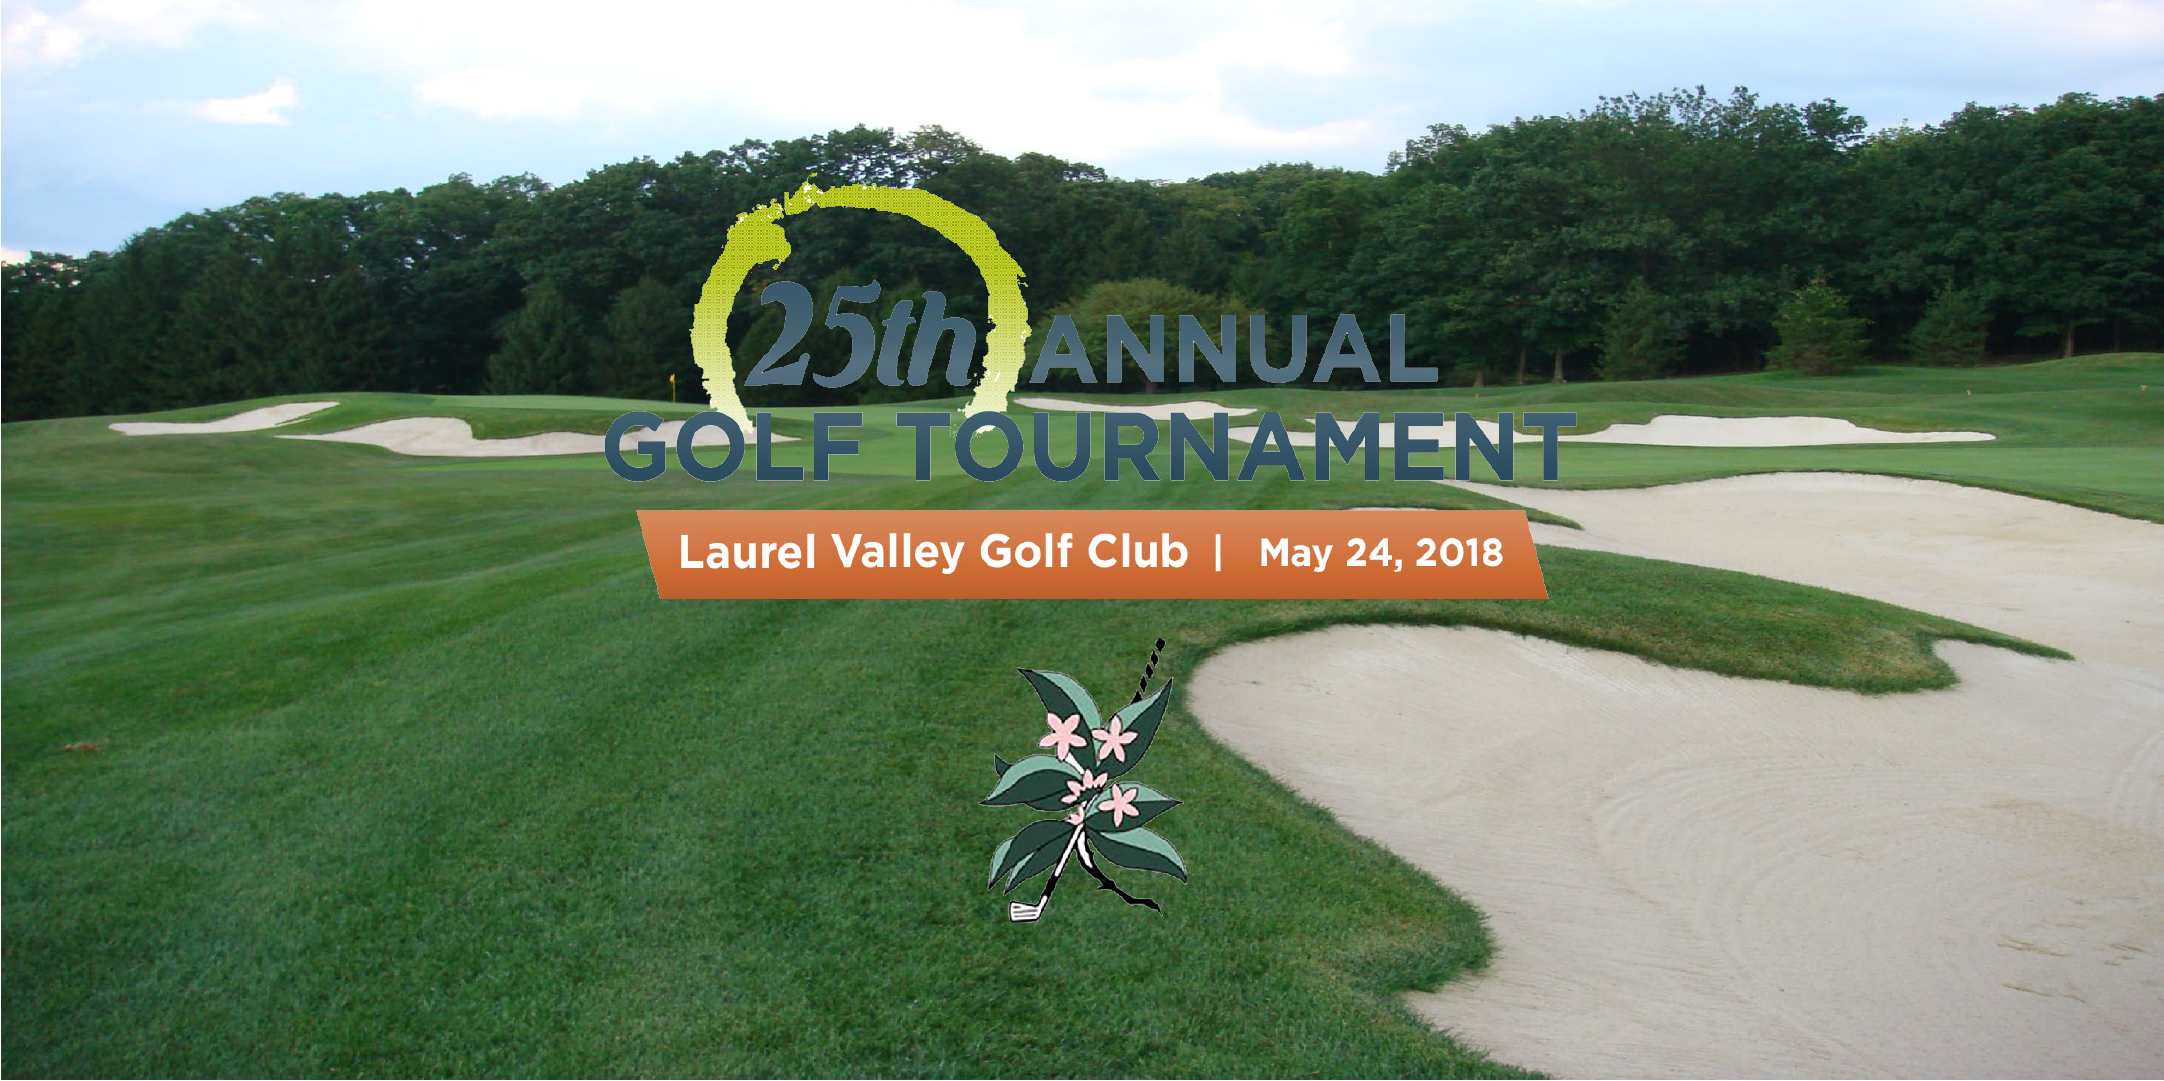 Center for Victims 25th Annual Golf Tournament at Laurel Valley Golf Club